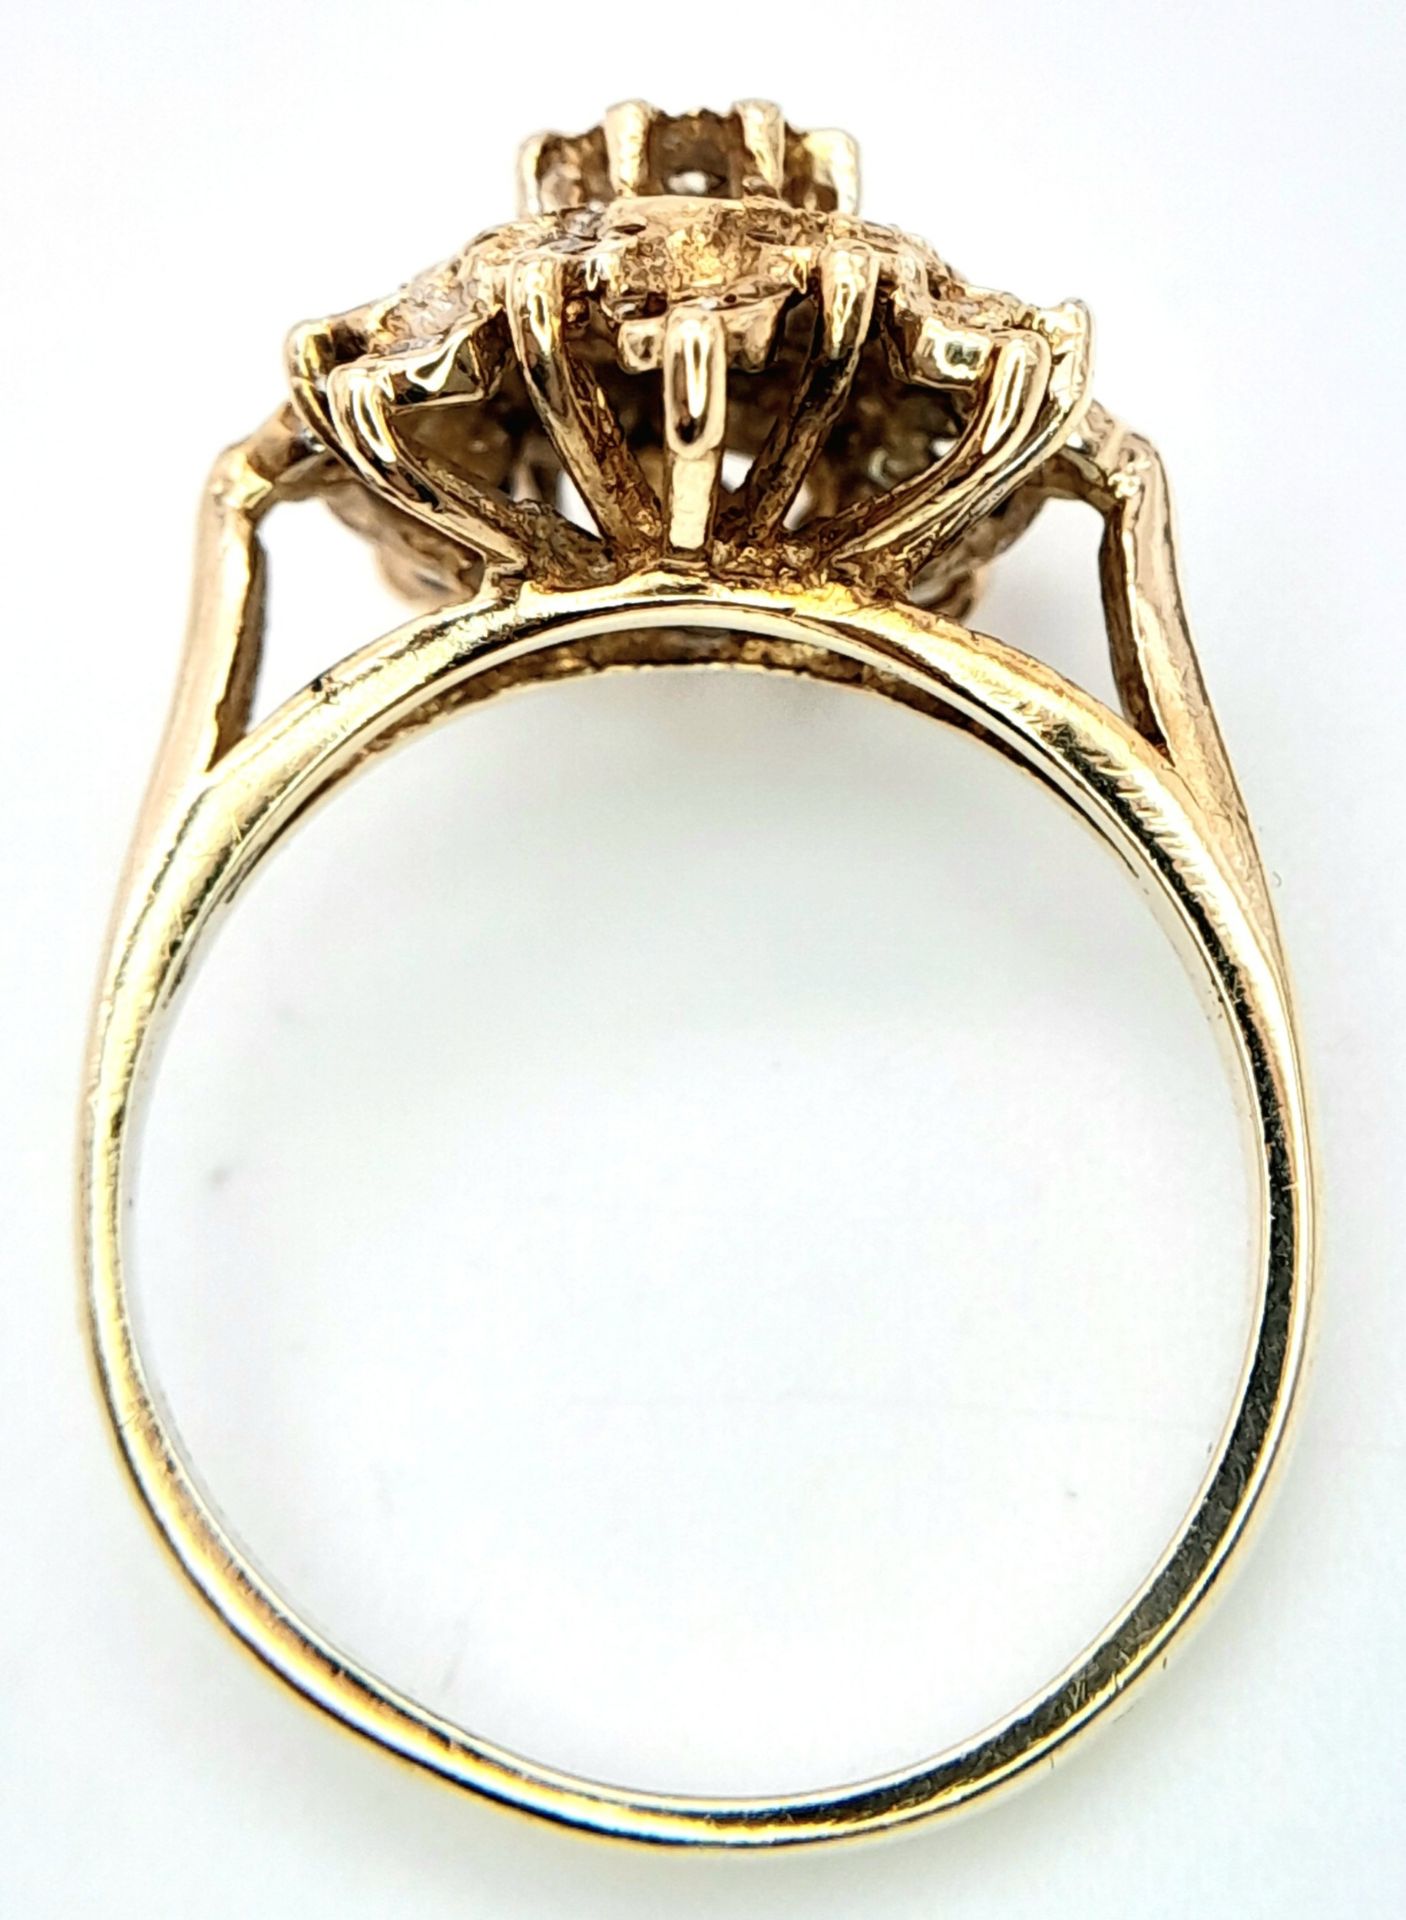 A 9K YELLOW GOLD DIAMOND CLUSTER RING. Size J, 2.8g total weight. Ref: SC 8032 - Image 5 of 6